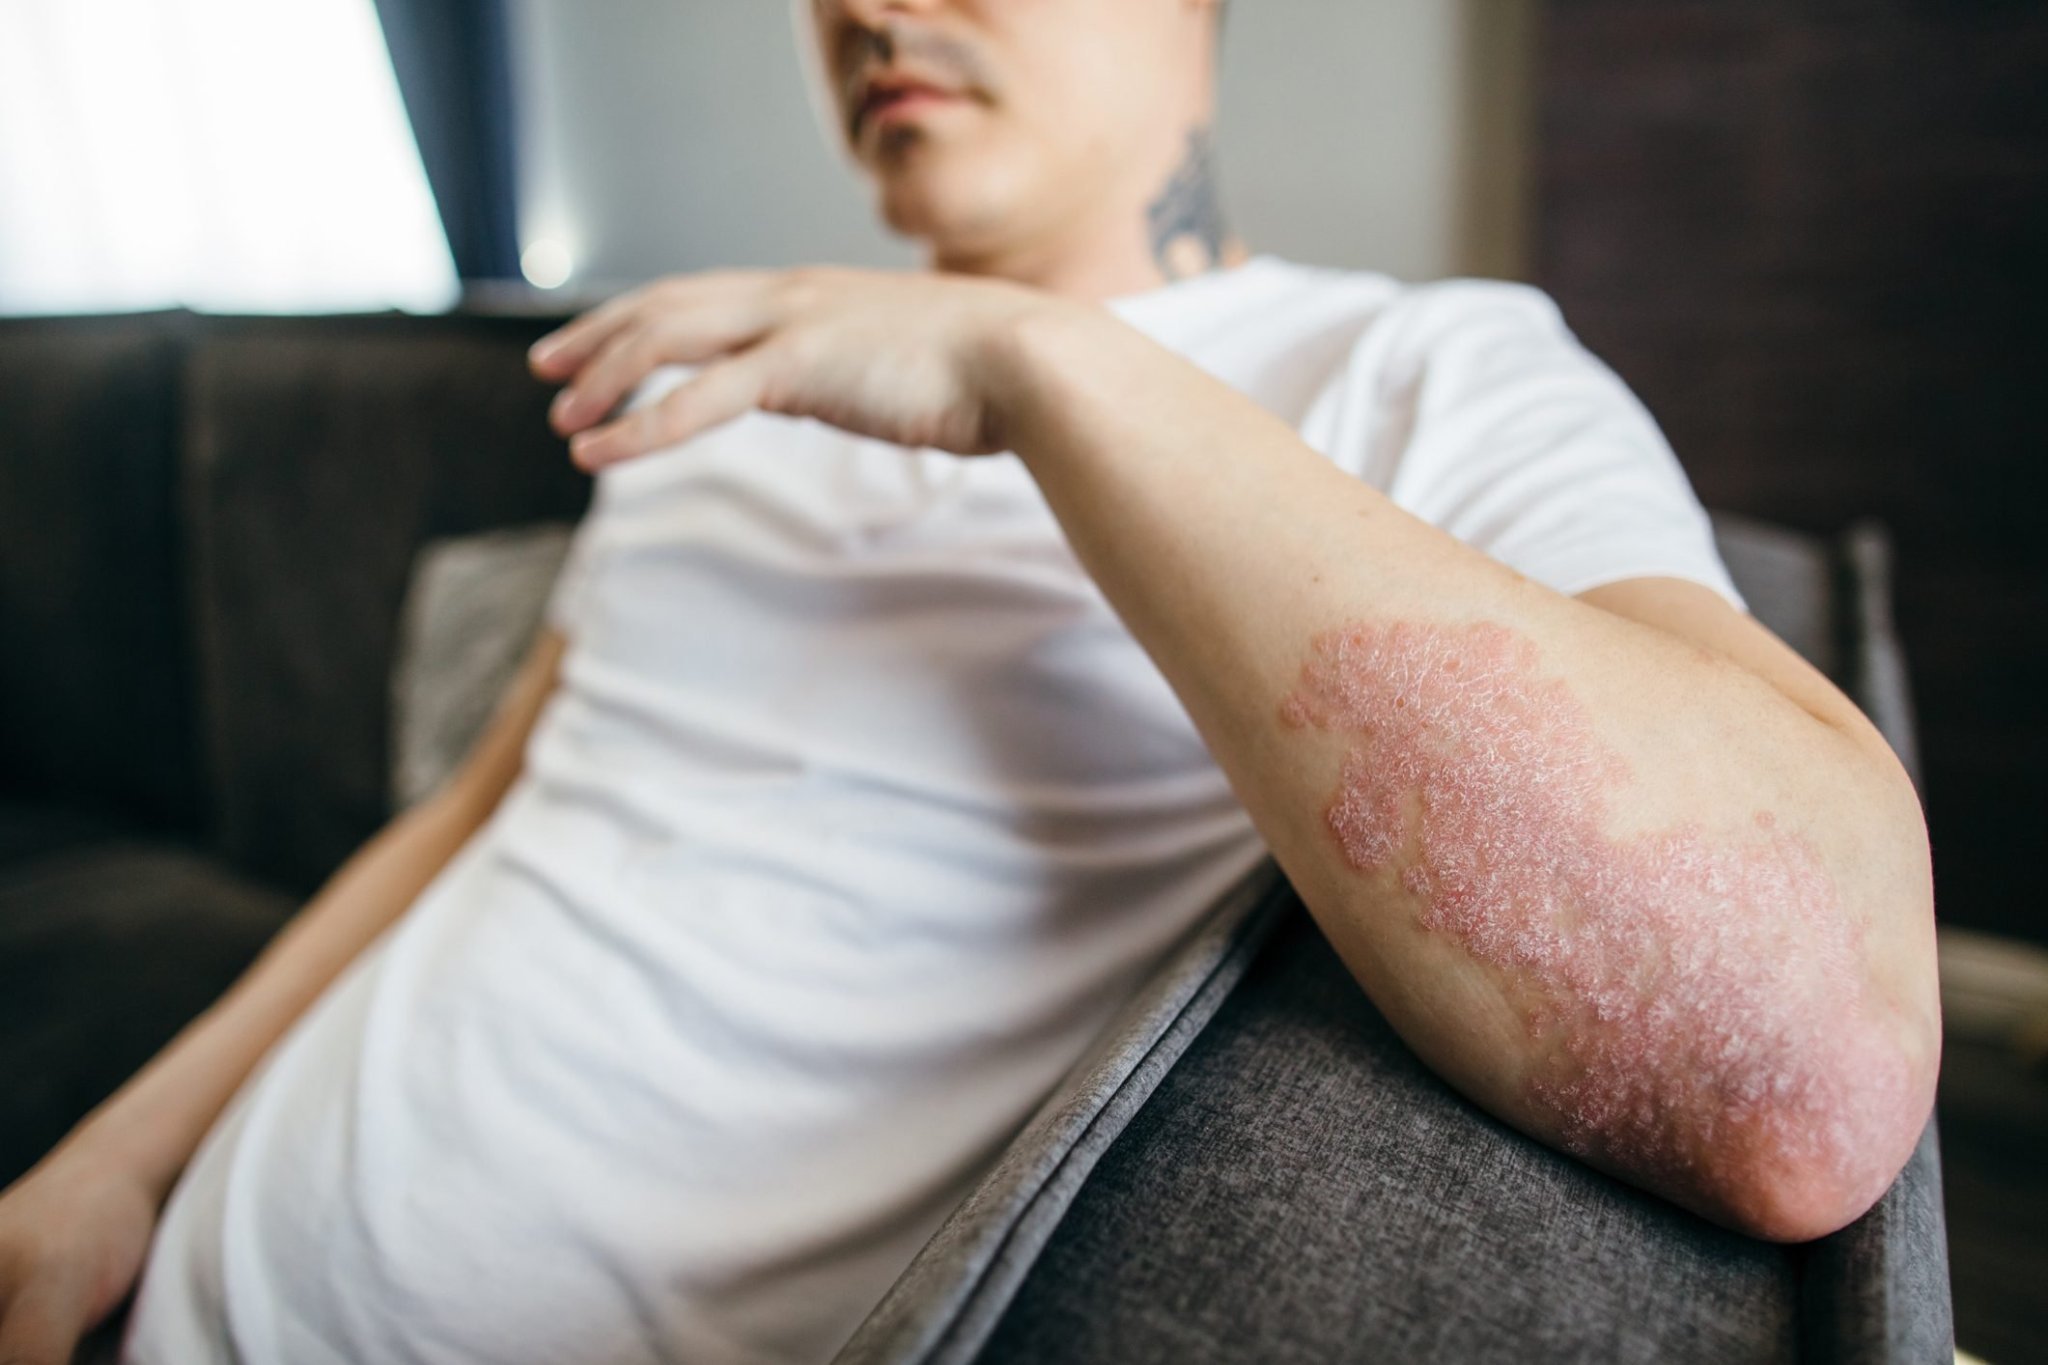 Monkeypox, Acne and Eczema: Know This About Your Risk